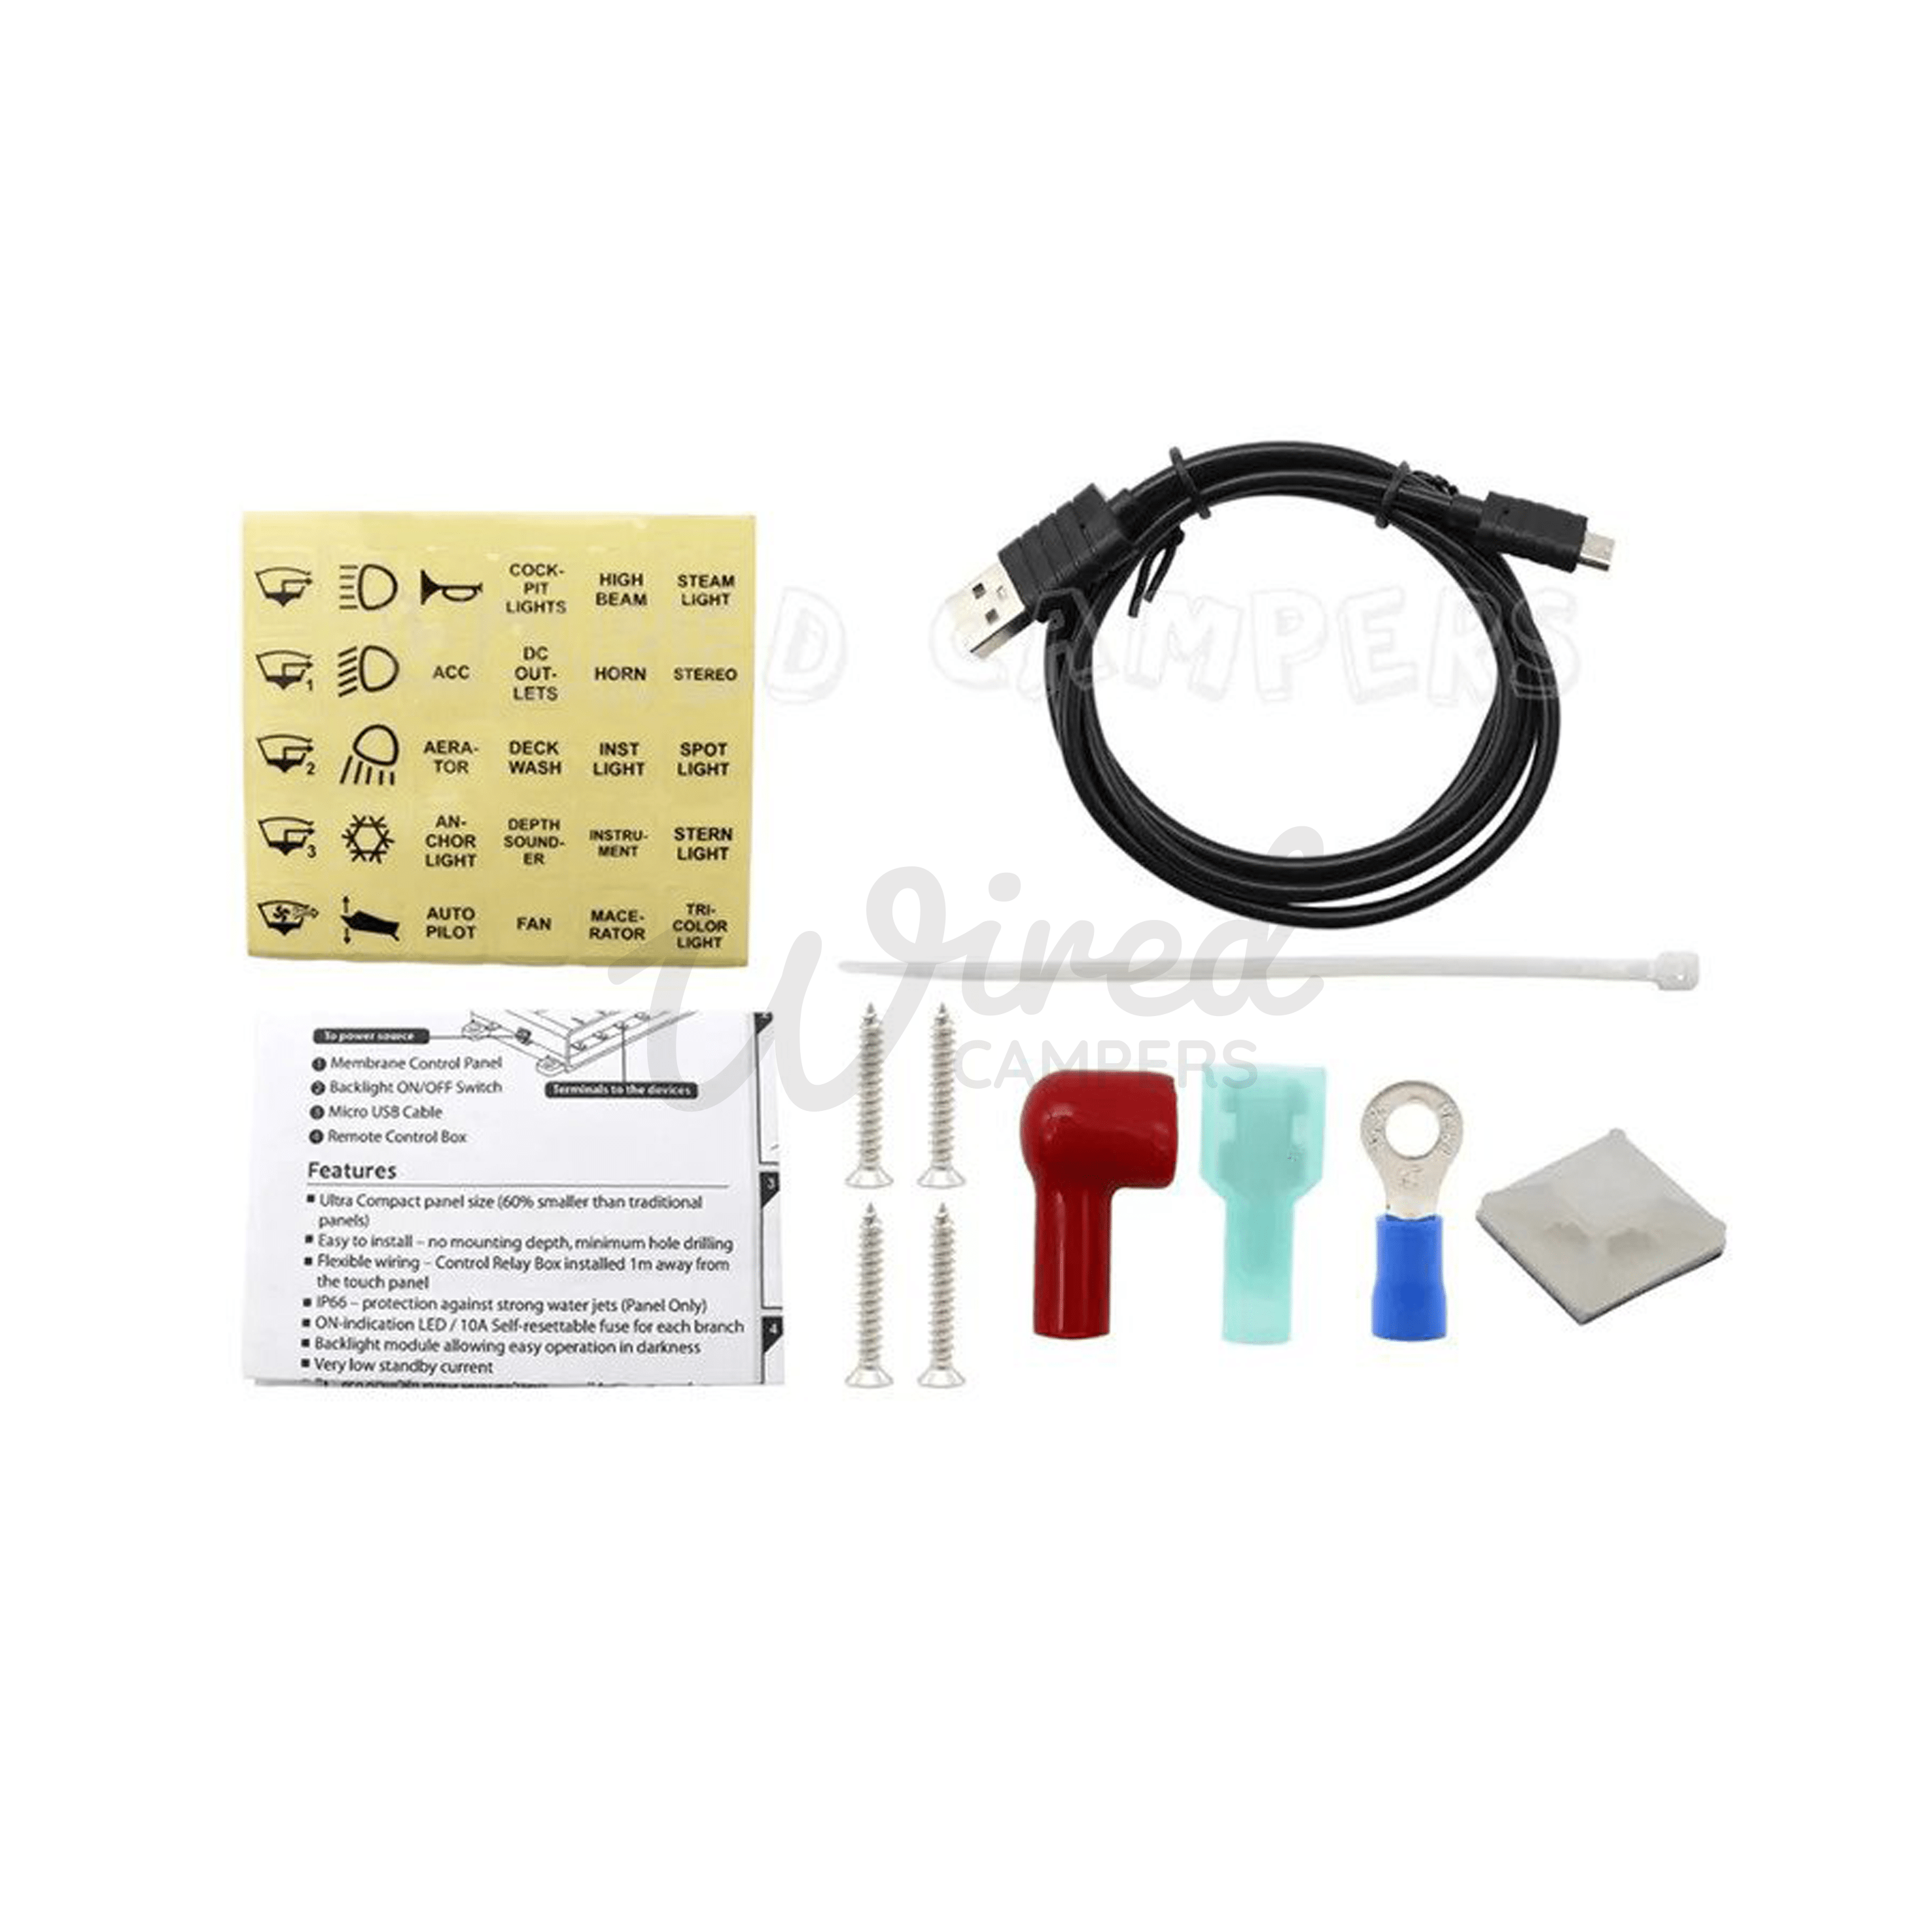 Wired Campers Limited 12V 10 Way Camper Van Light Up Membrane Touch Panel & Control Box